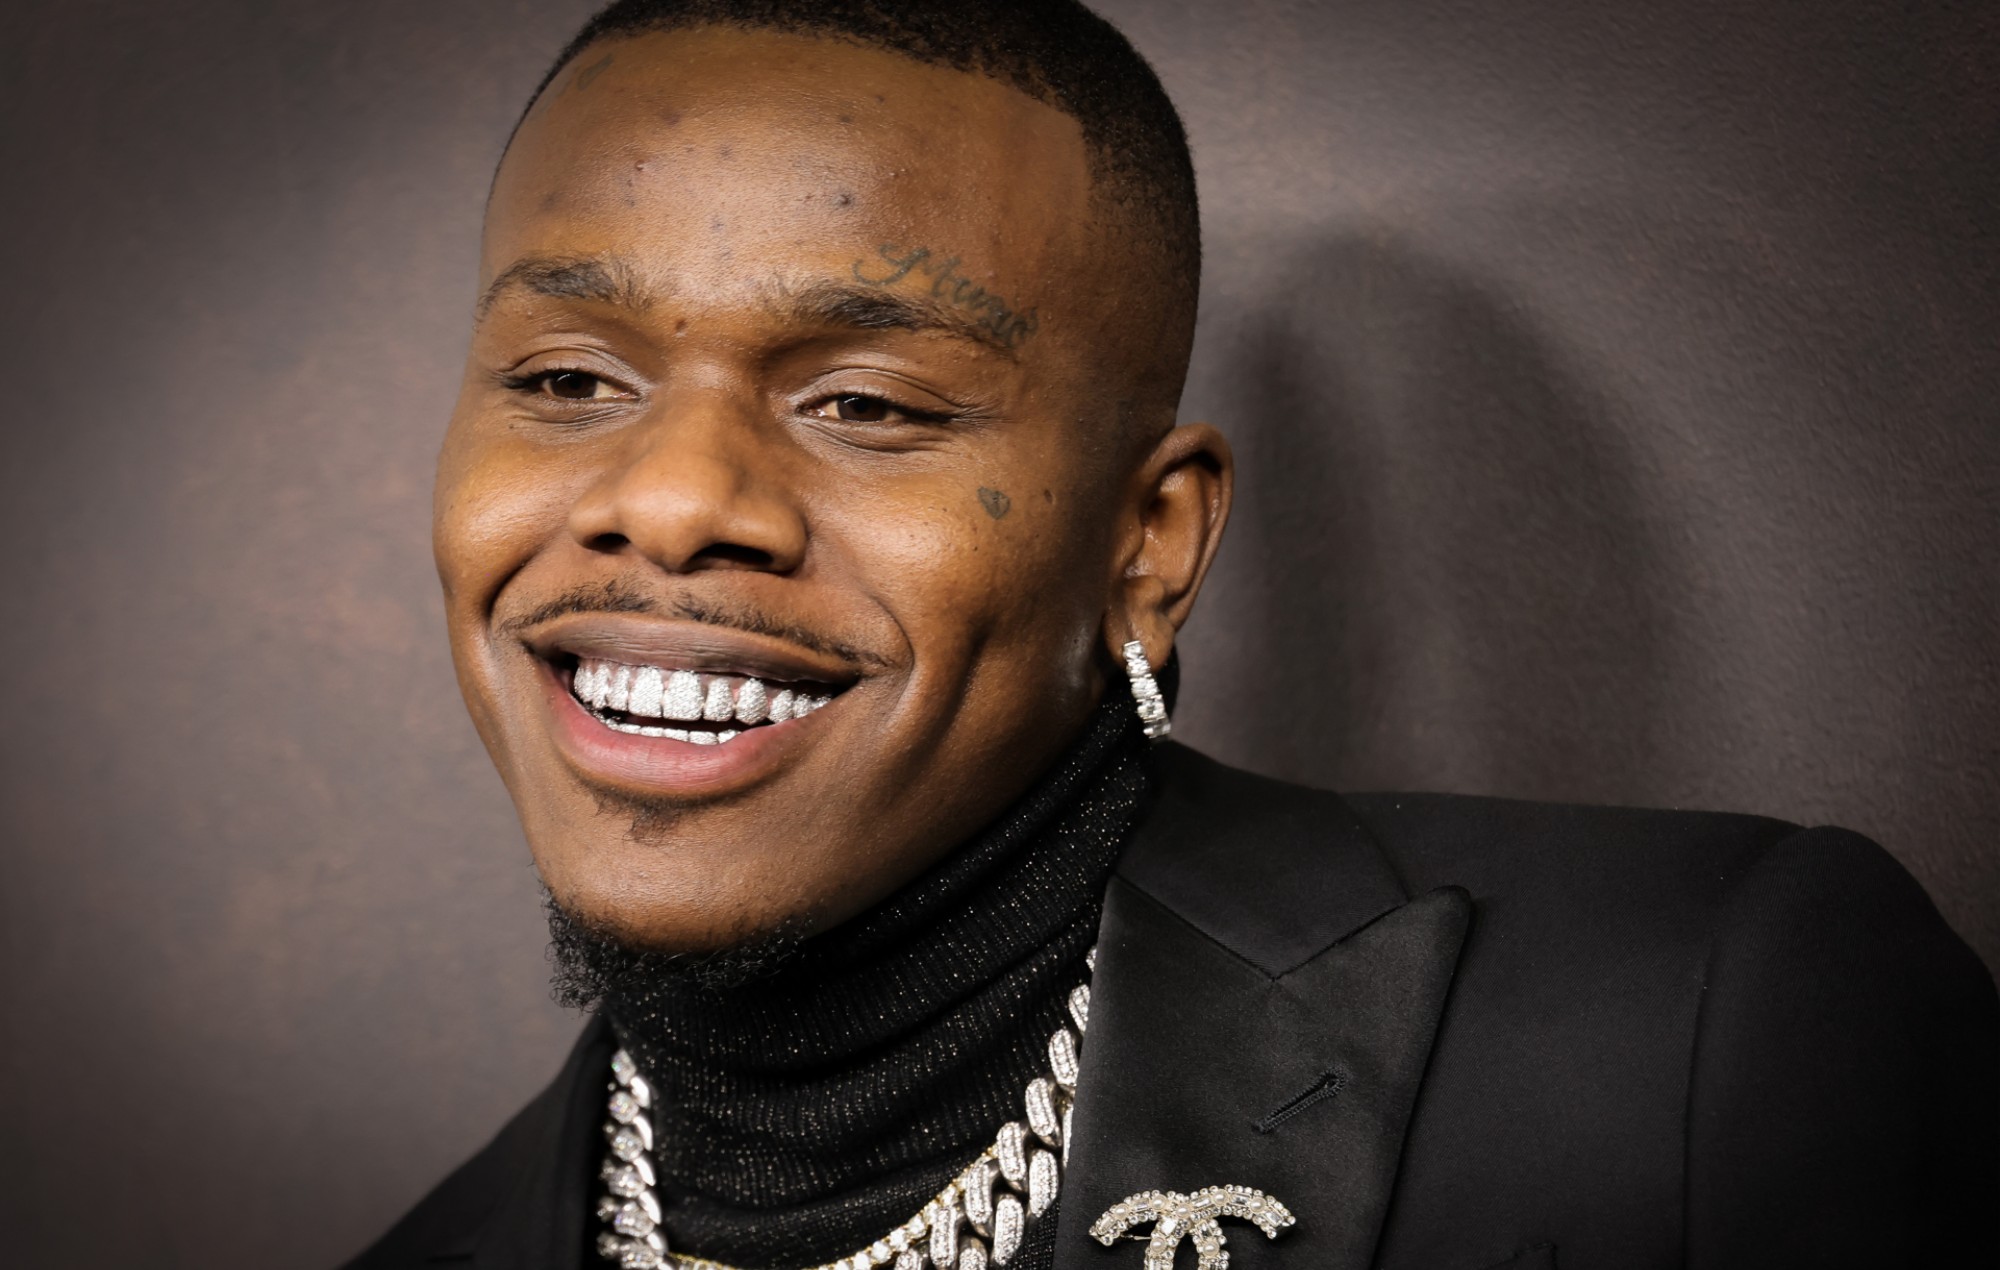 DaBaby discovered not liable in 6million lawsuit